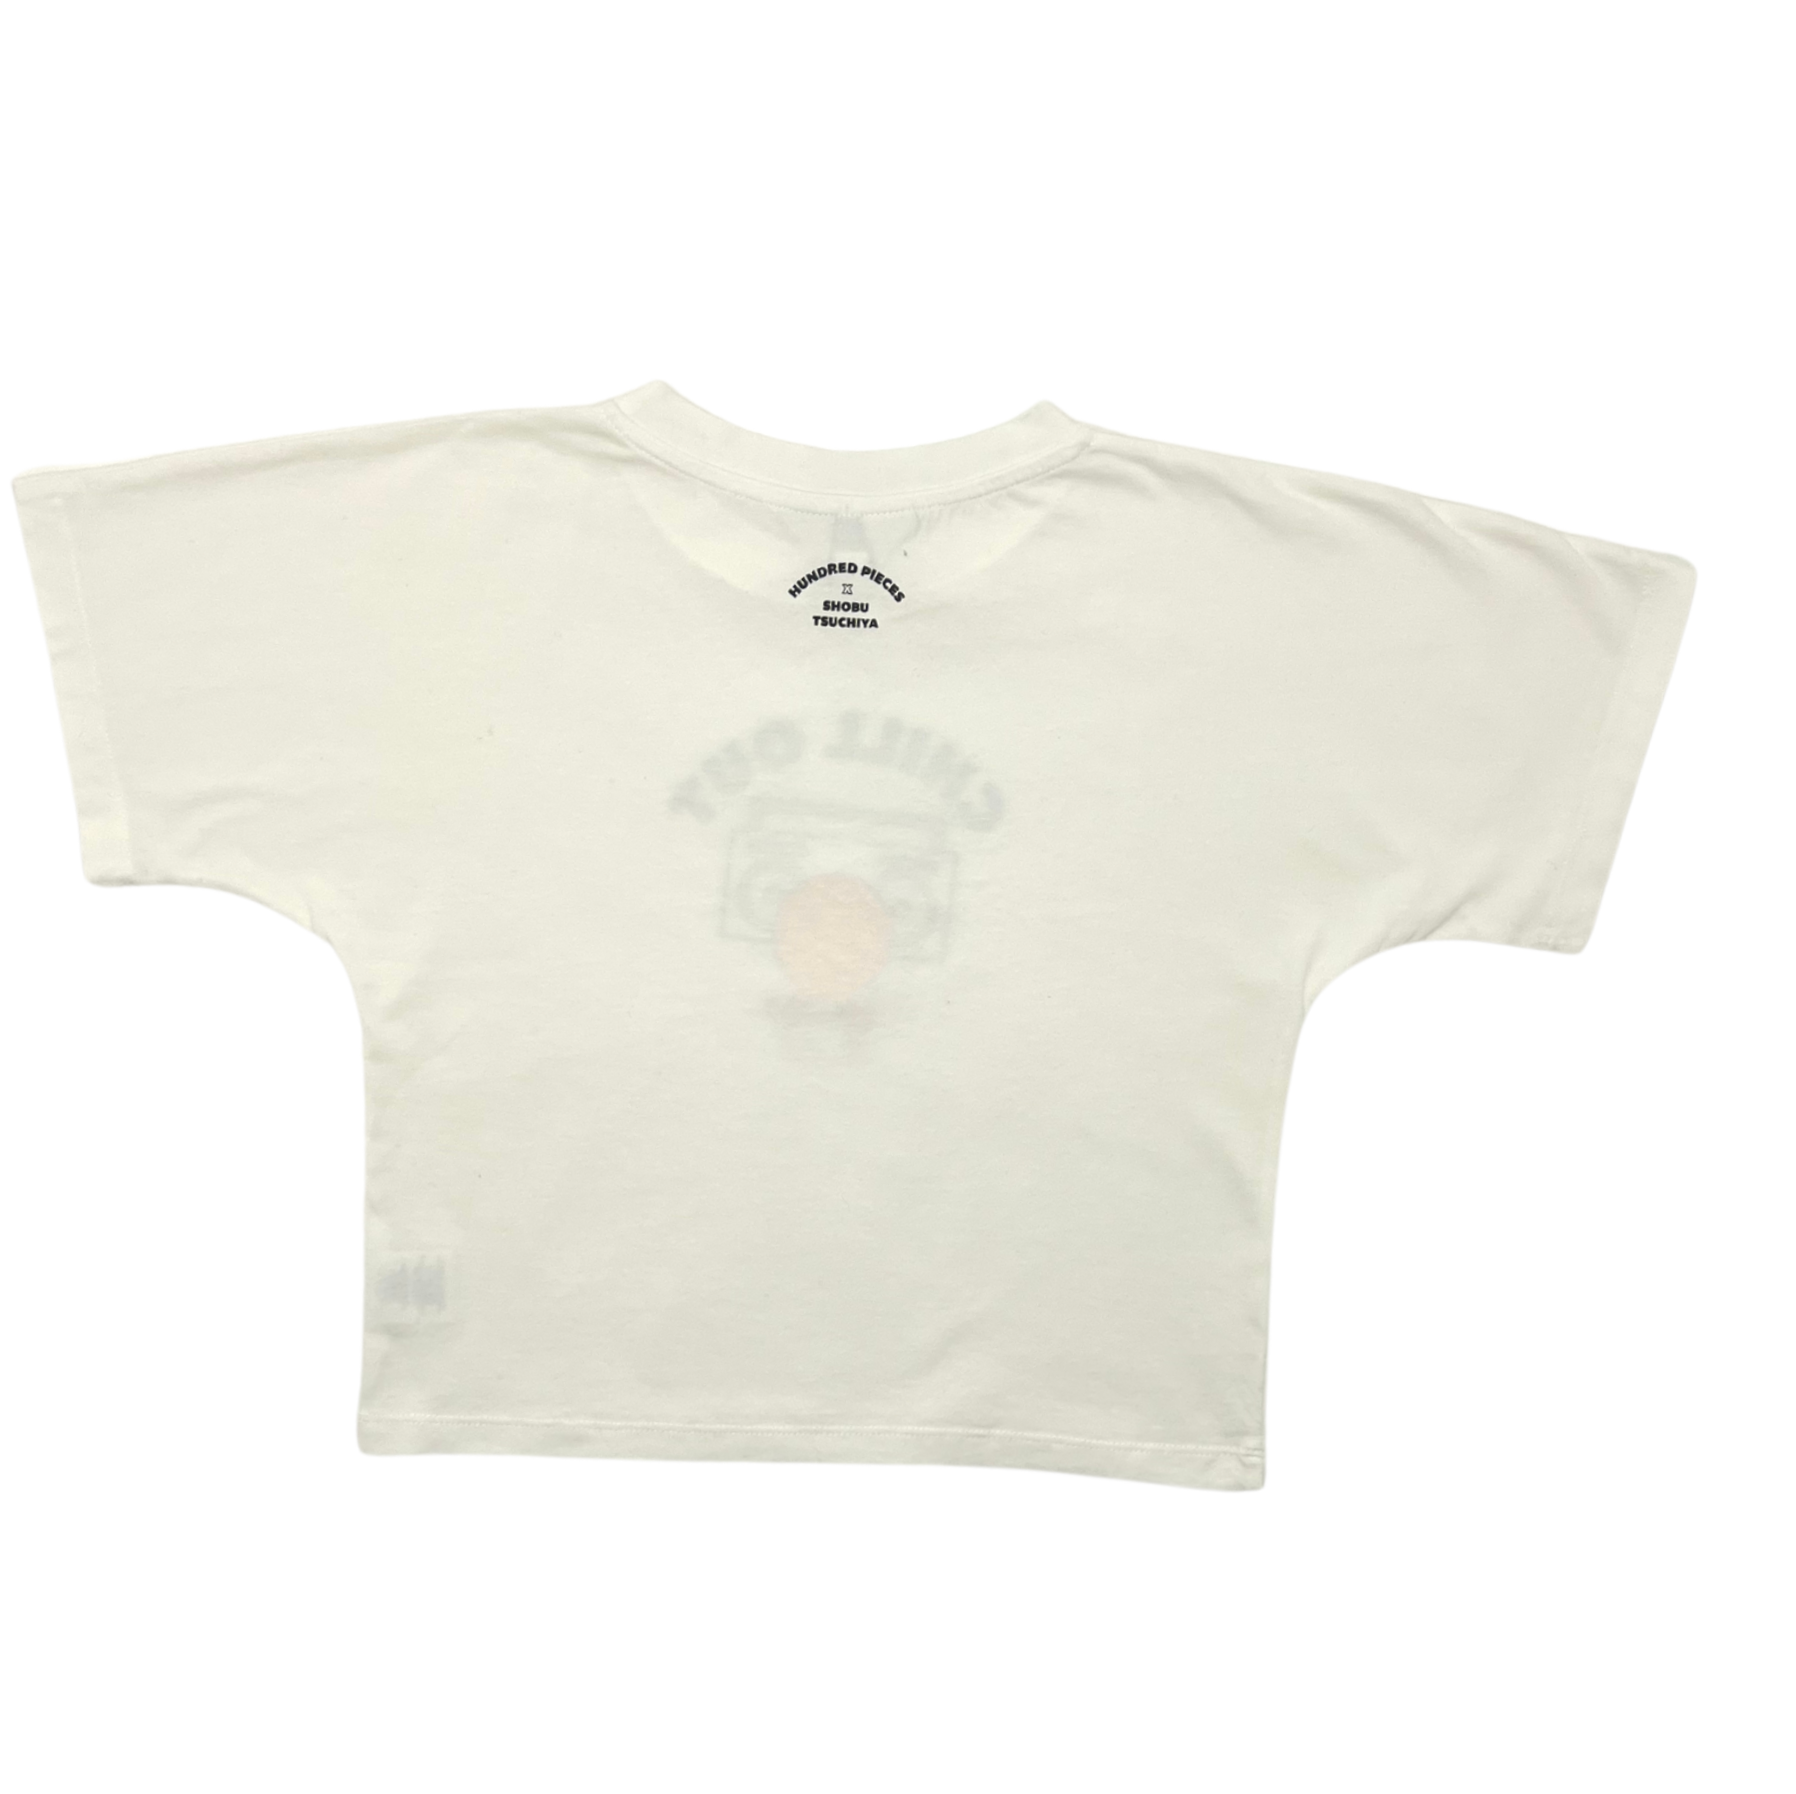 HUNDRED PIECES - "Chill out" t-shirt - 8 years old